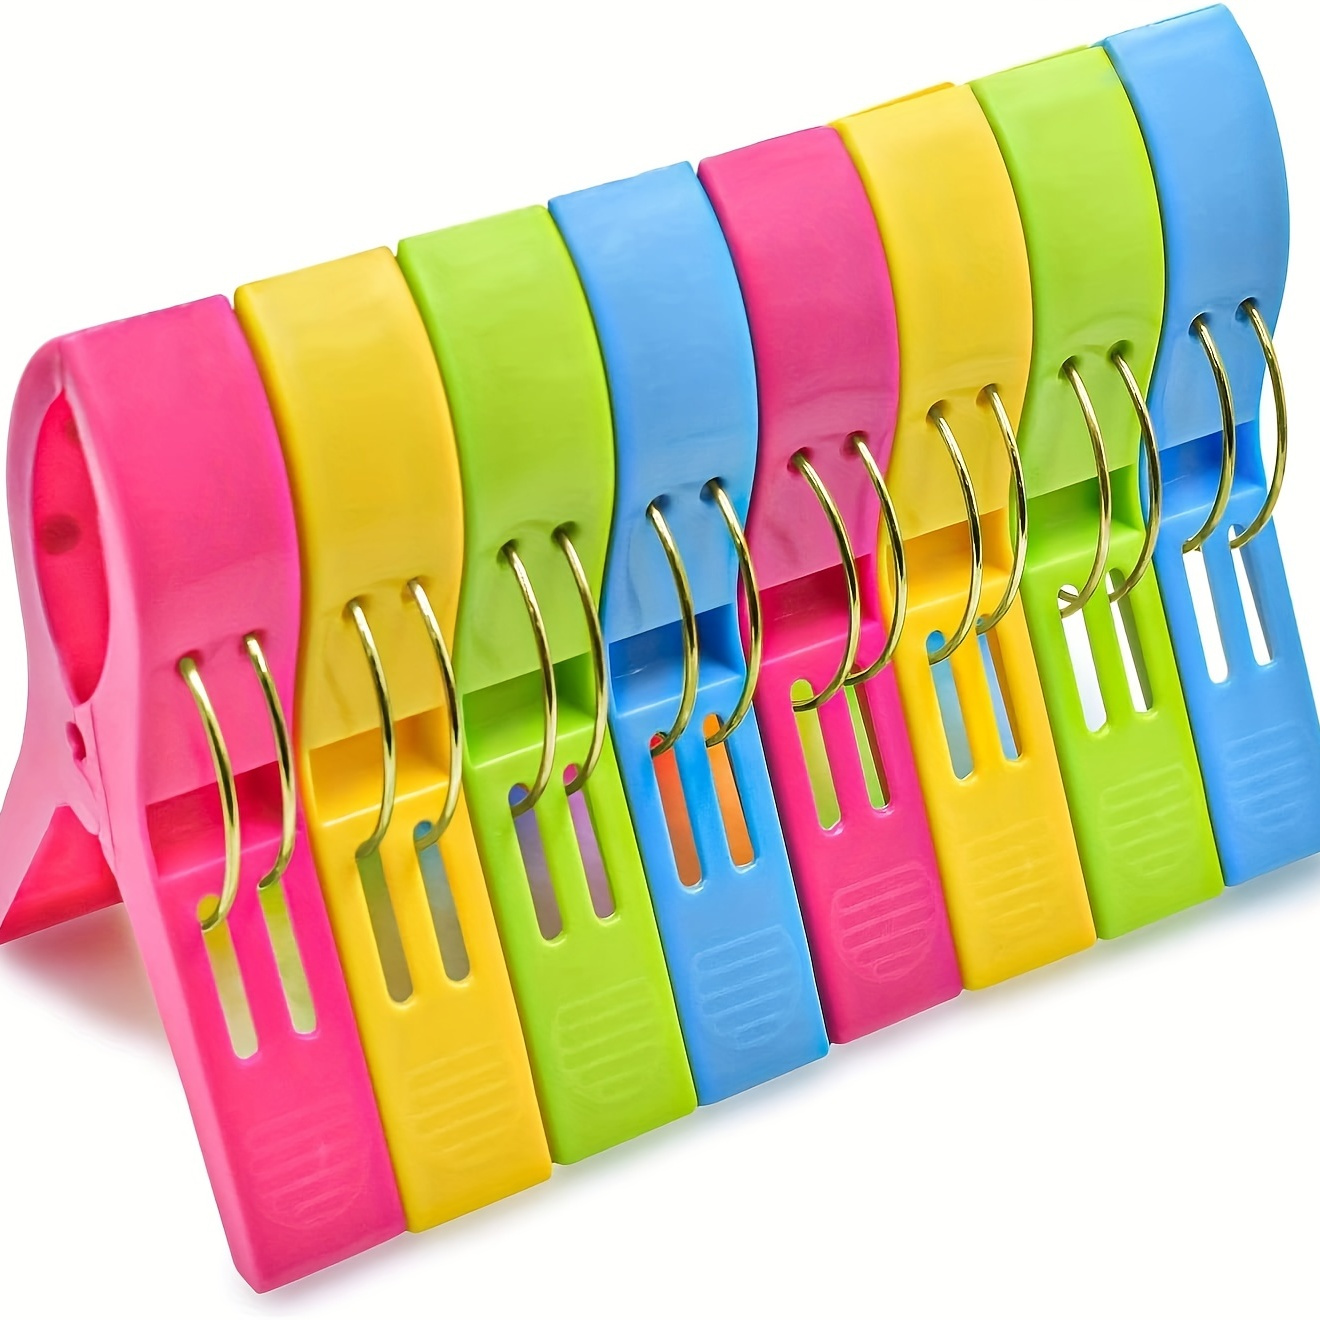 

8pcs Beach Towel Clips, Chair Clips, Towel Holder, Plastic Clothes Pegs, Hanging Clip, Clamps, Clothes Pins